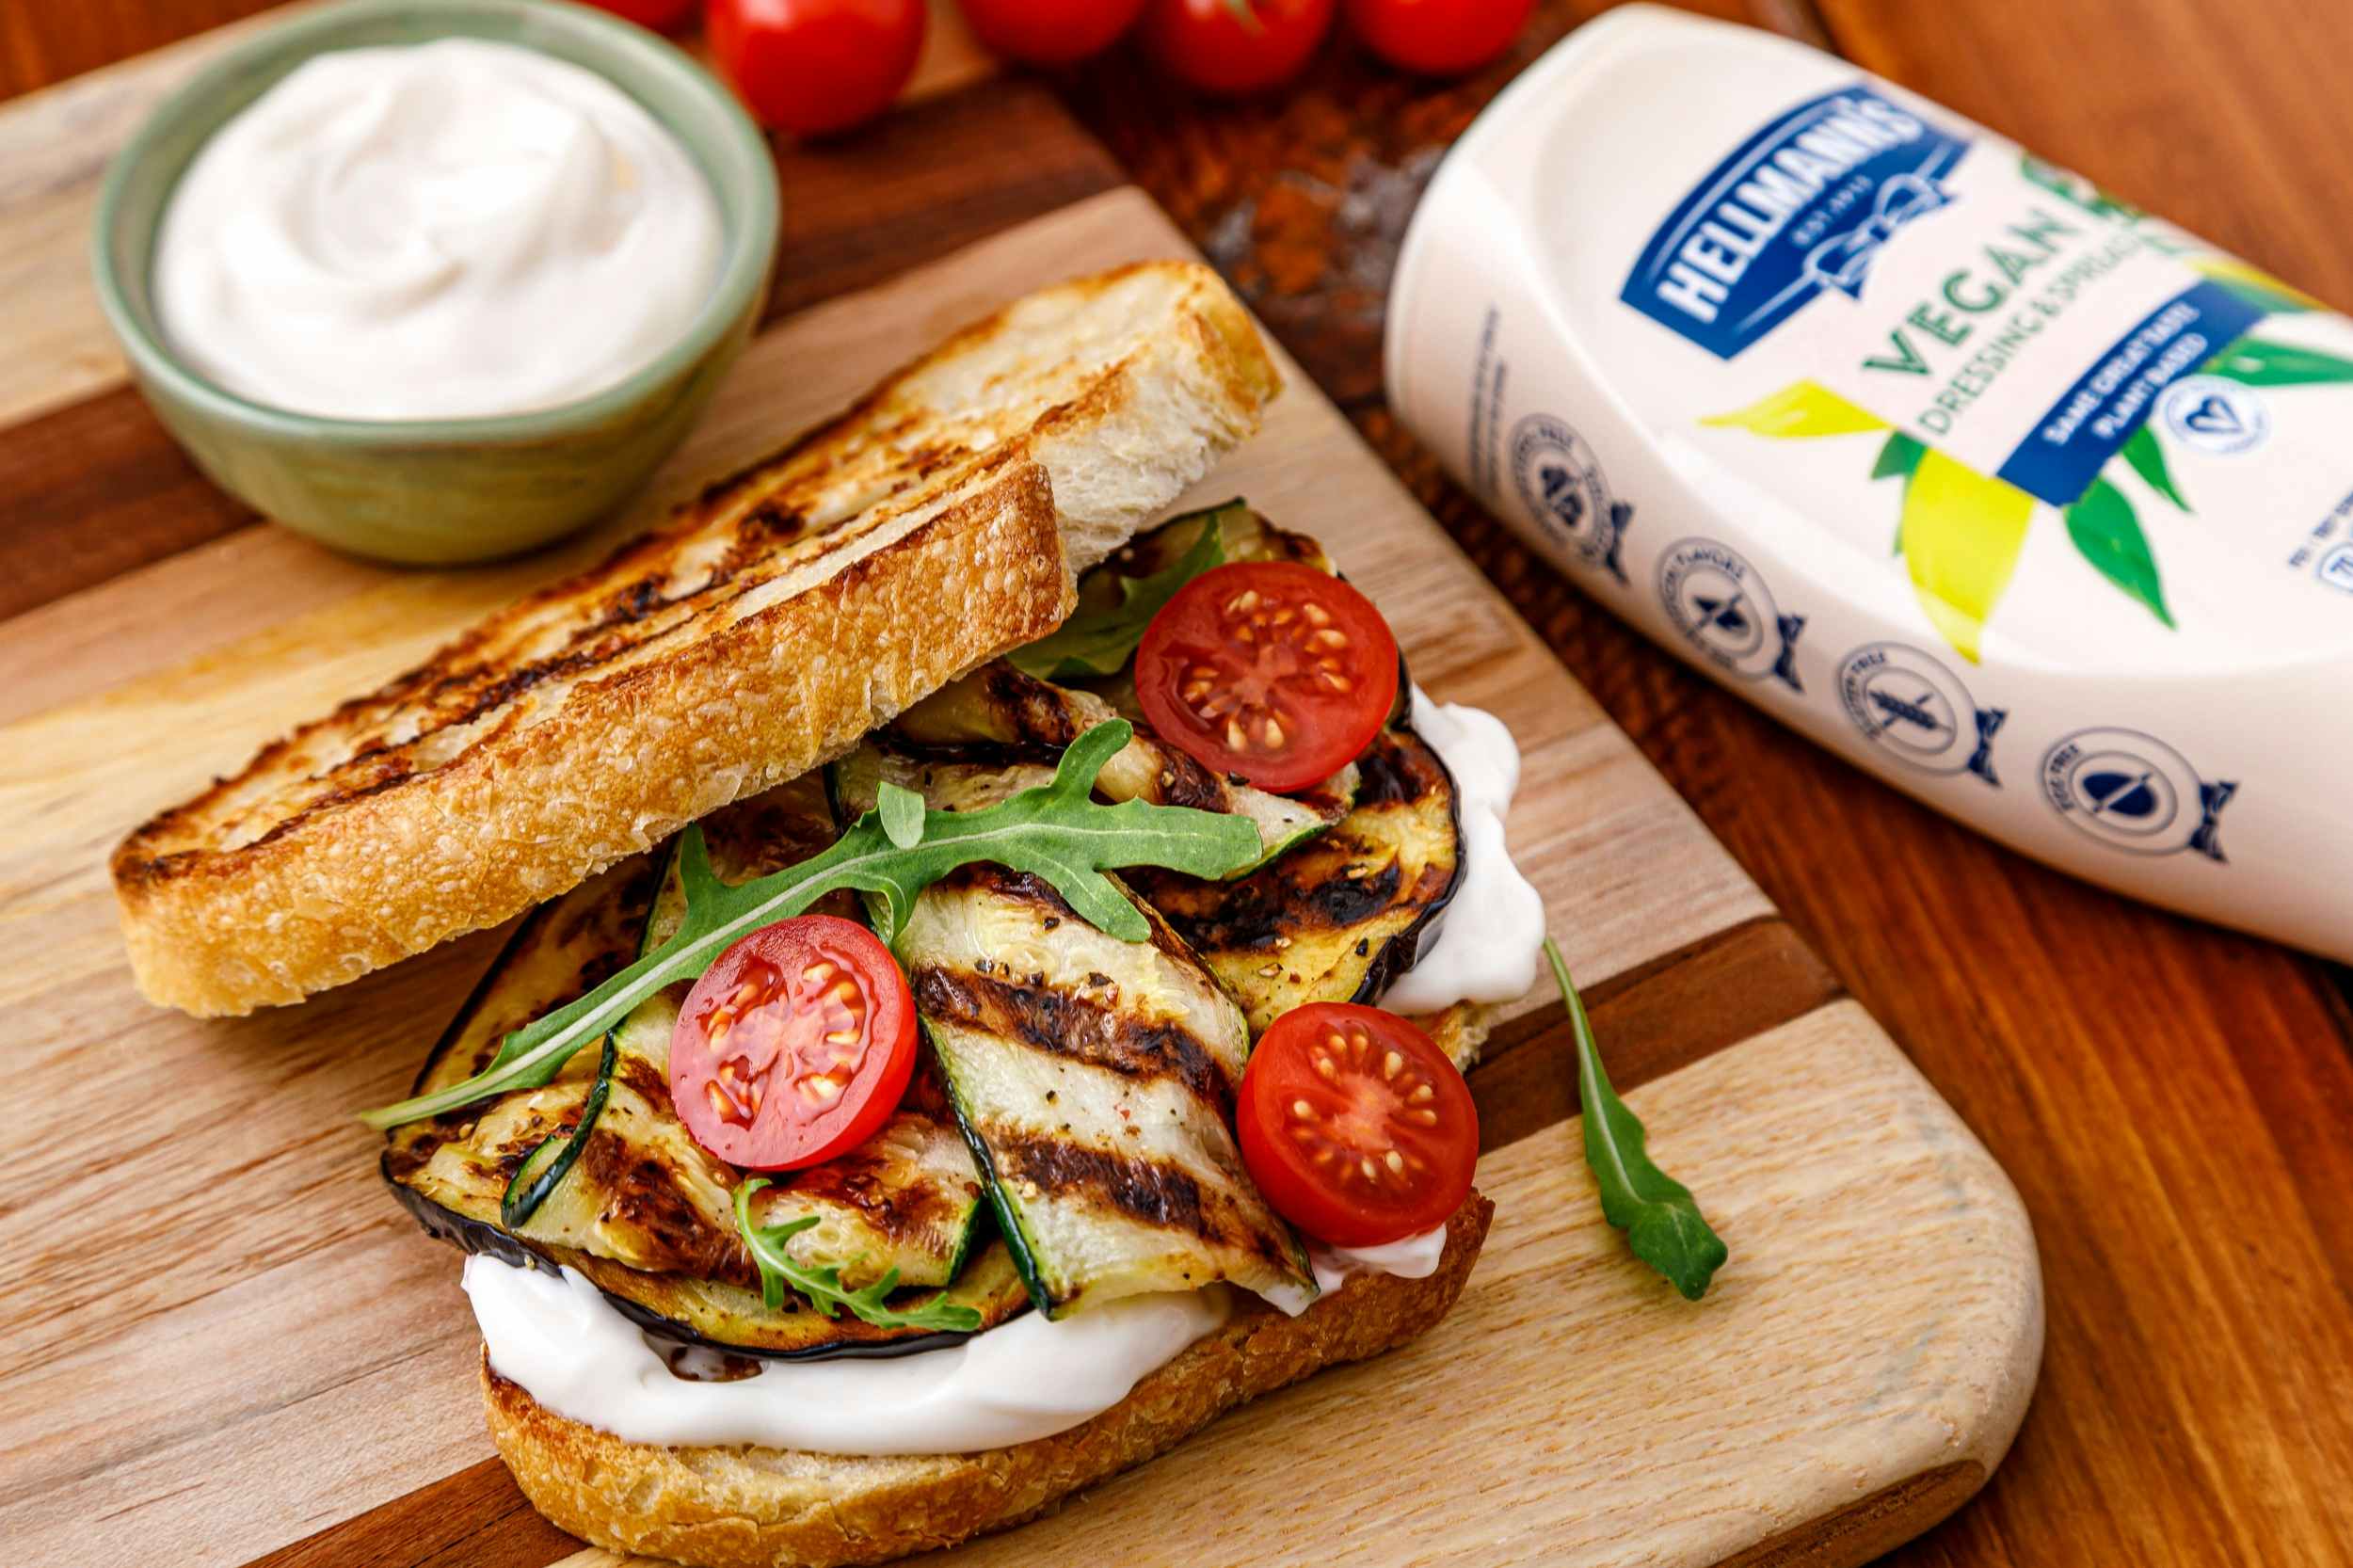 a grilled sandwich made with hellmann's vegan spread